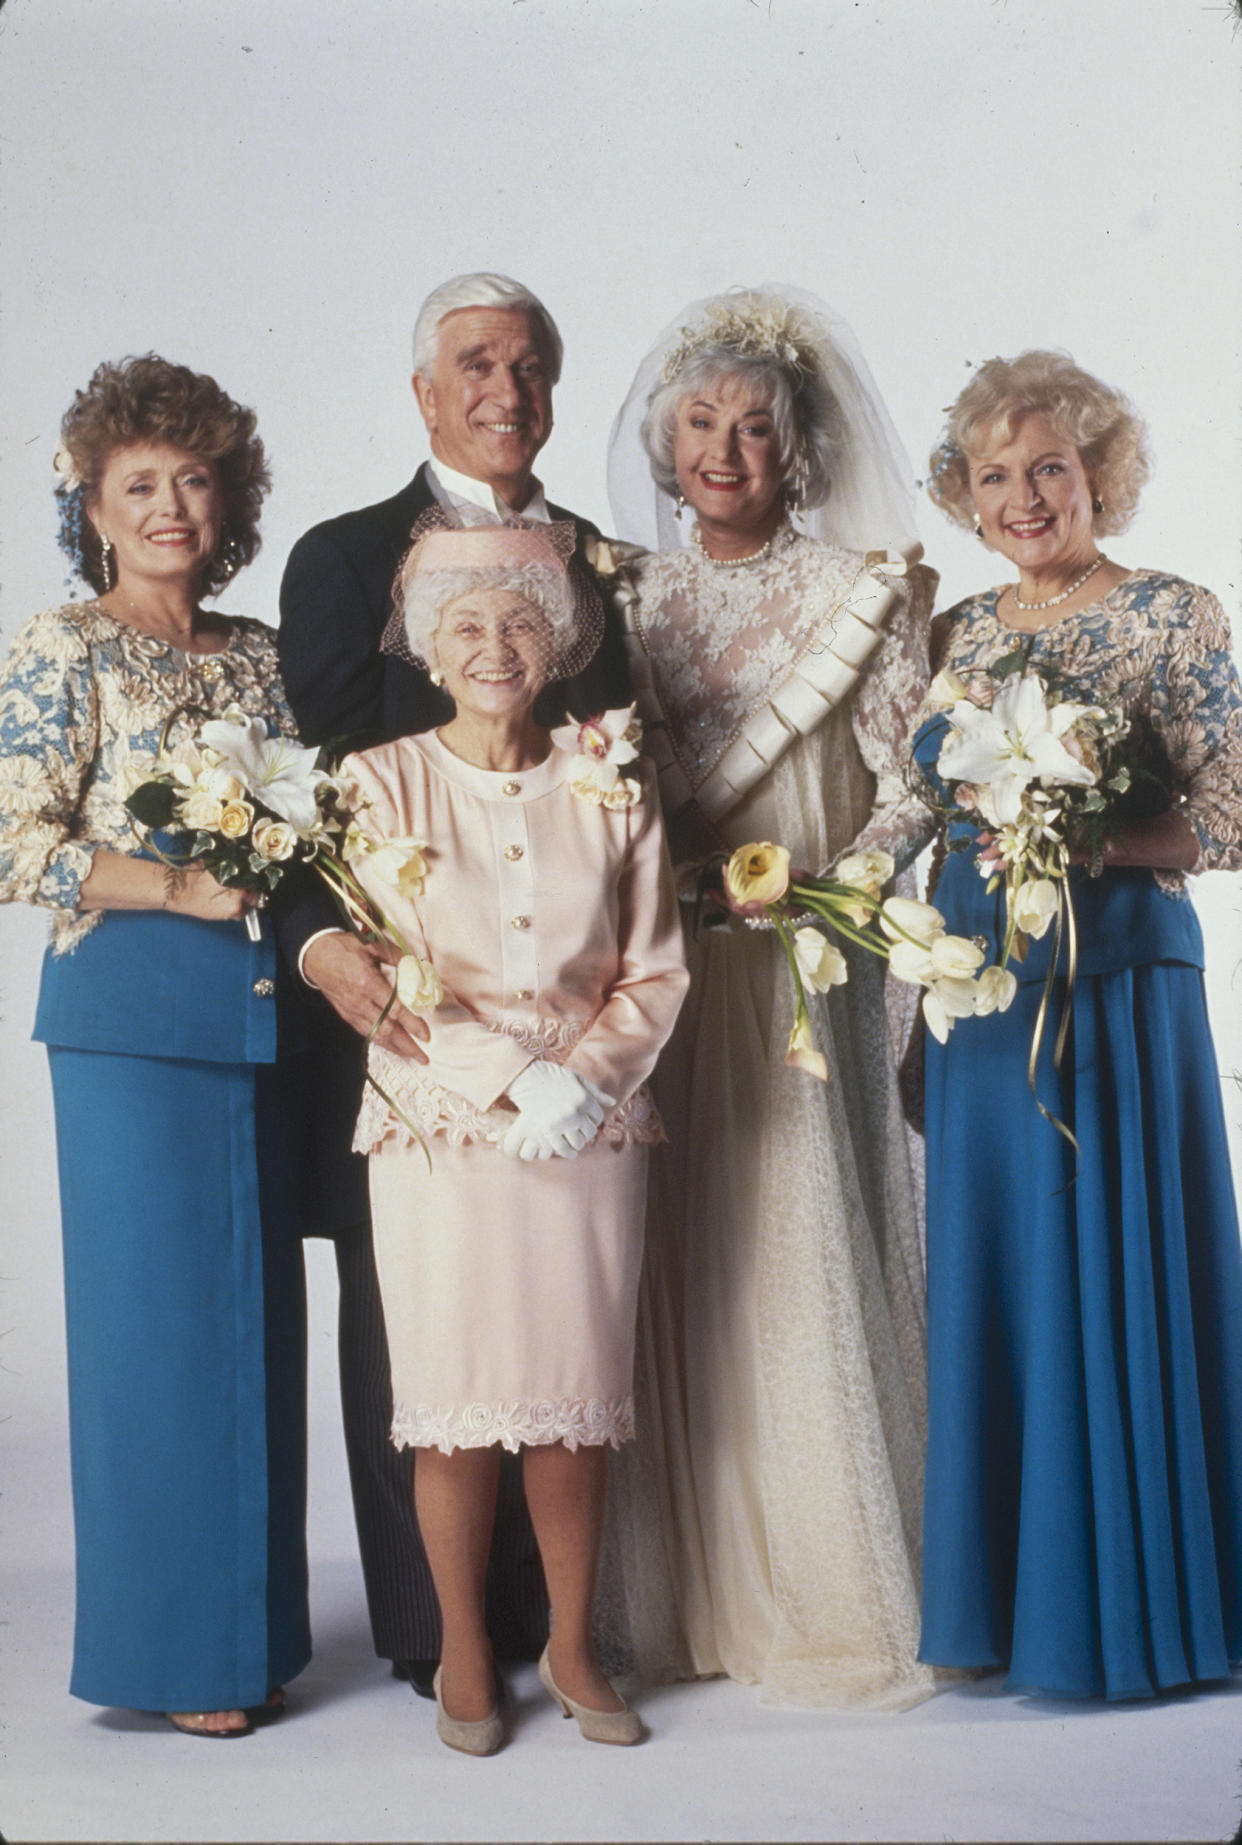 THE GOLDEN GIRLS (ABC Photo Archives / Disney General Entertainment Content via Getty Images)